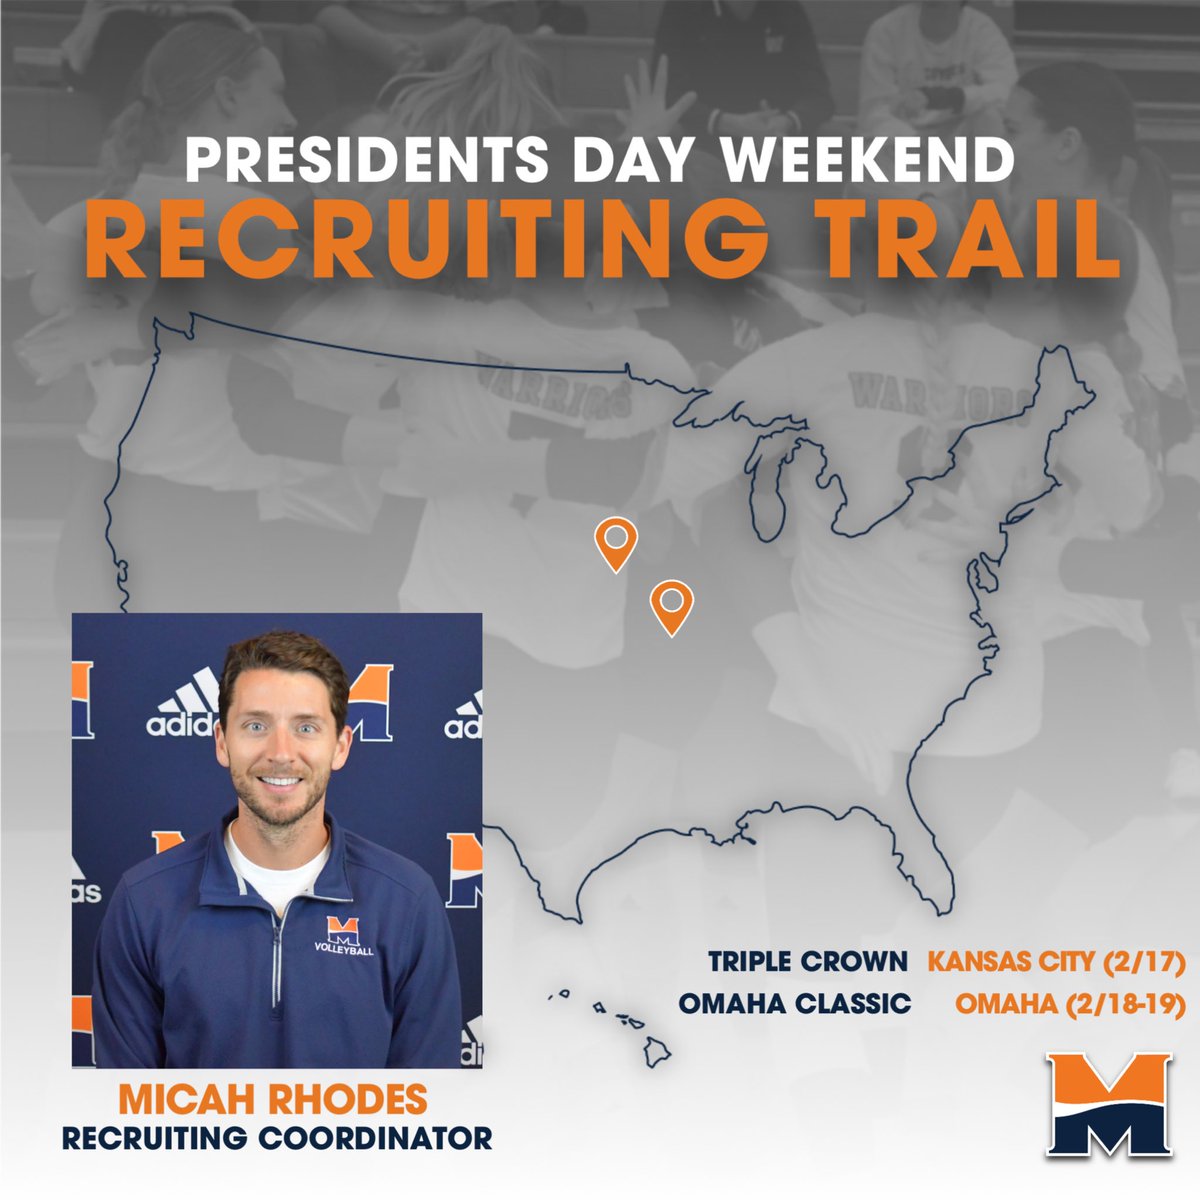 On the lookout. 👀 @MicahRhodes is hitting the recruiting trail this Presidents’ Day weekend in search of future Warriors. You can find him in both Kansas City and Omaha! Best of luck to all participating athletes, coaches, and teams. 🧡